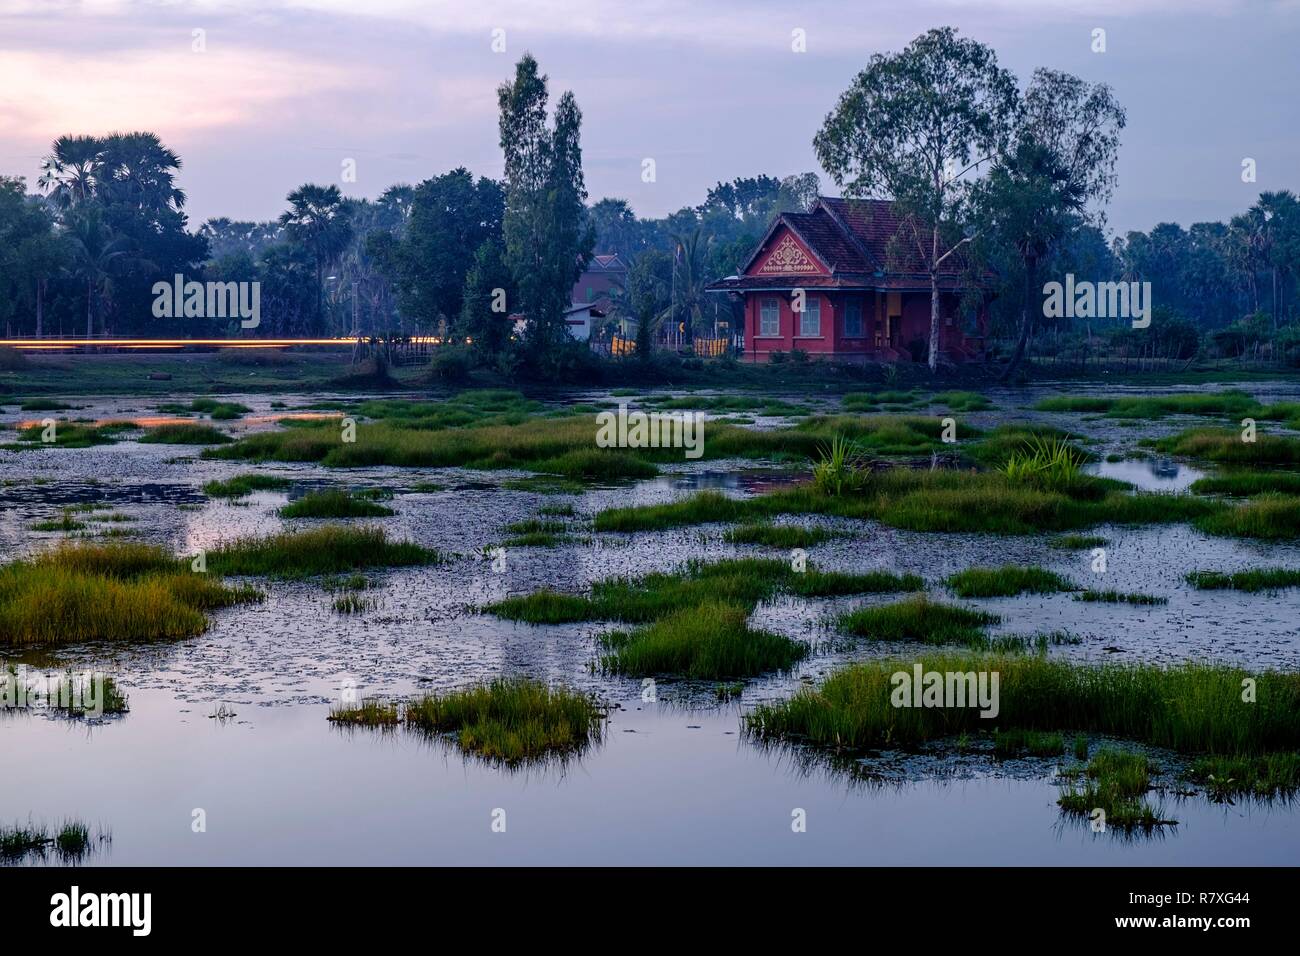 Cambodia, Kompong Thom province, Kompong Thom or Kampong Thom, traditional house in front of a pond Stock Photo